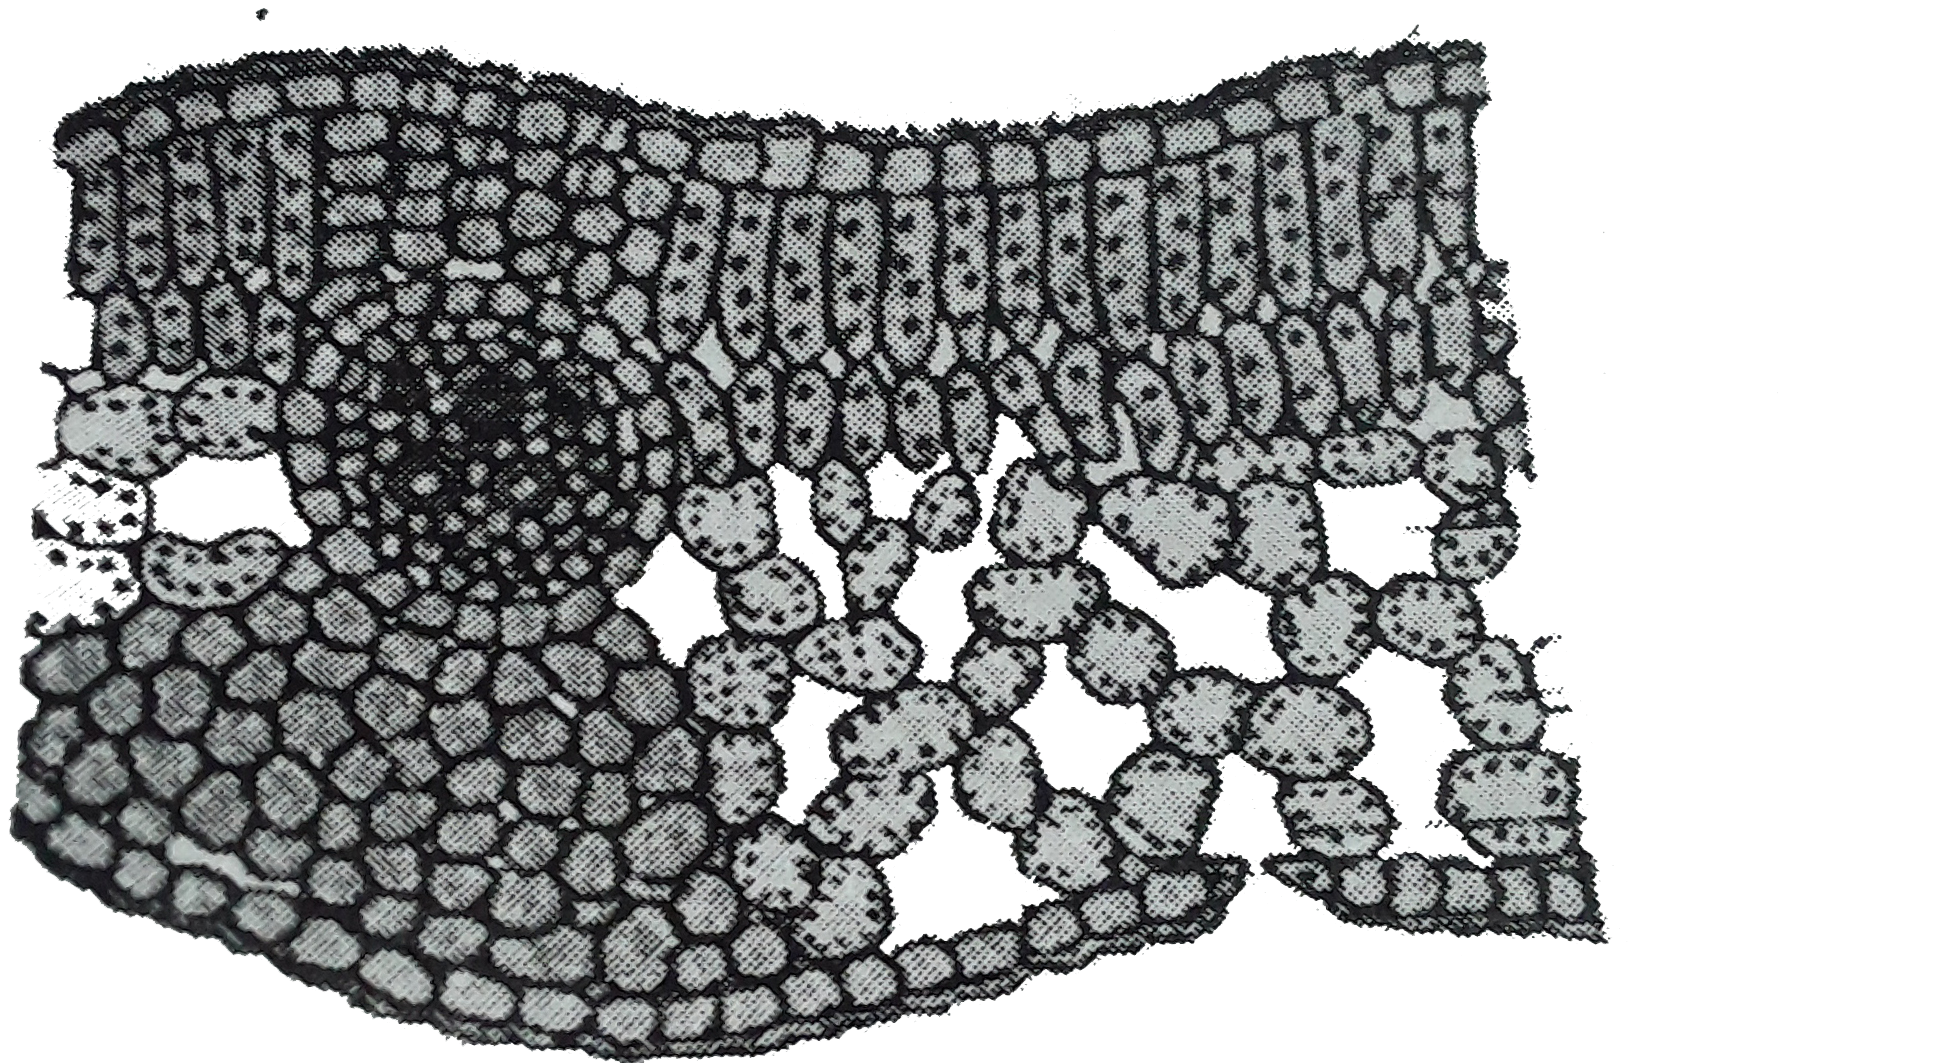 Look at the given figure find the position (Adaxial or abaxial) of xylem in the vascular bundle.